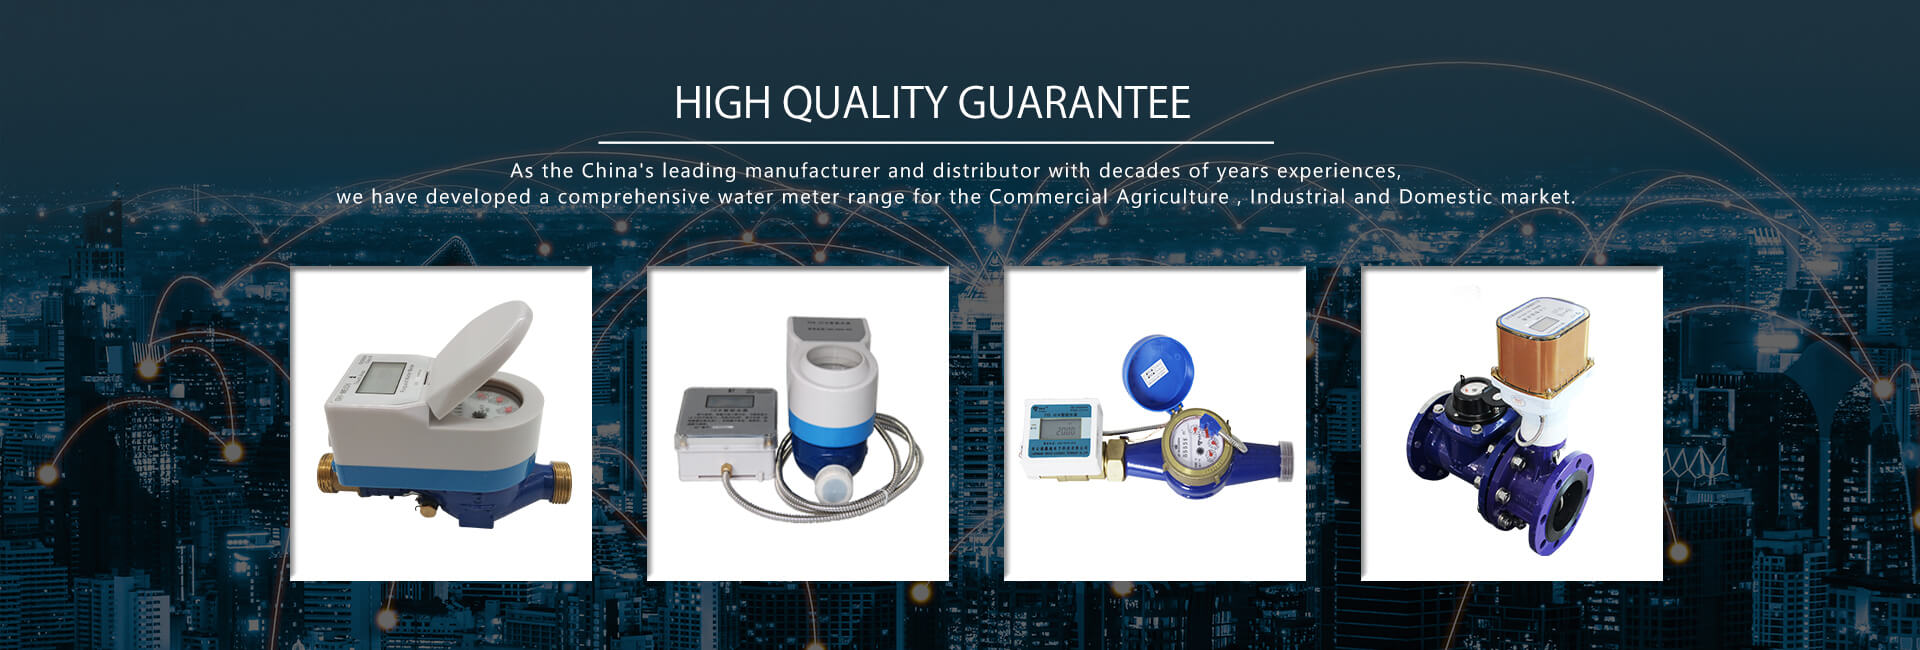 IC card water meter is an effective way to save water